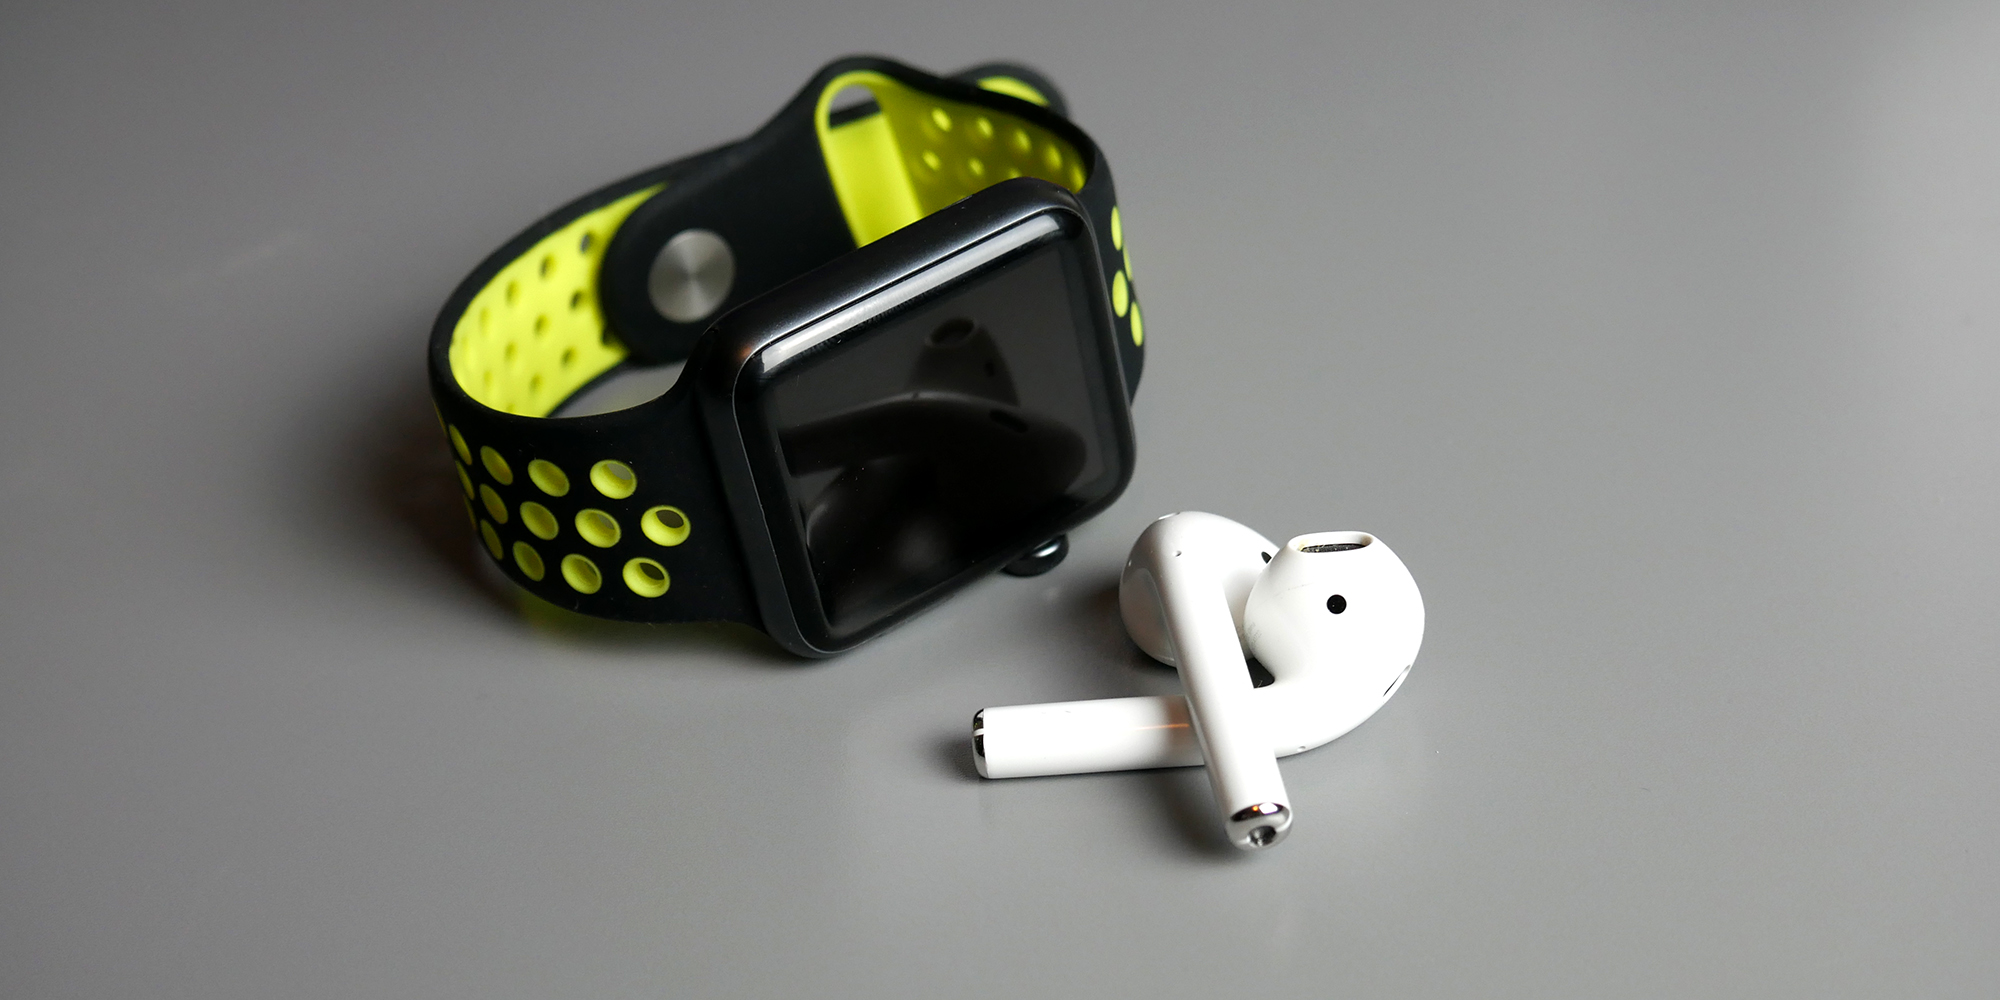 Nike+ Run Club becomes more w/ support for custom Audio Cheers - 9to5Mac